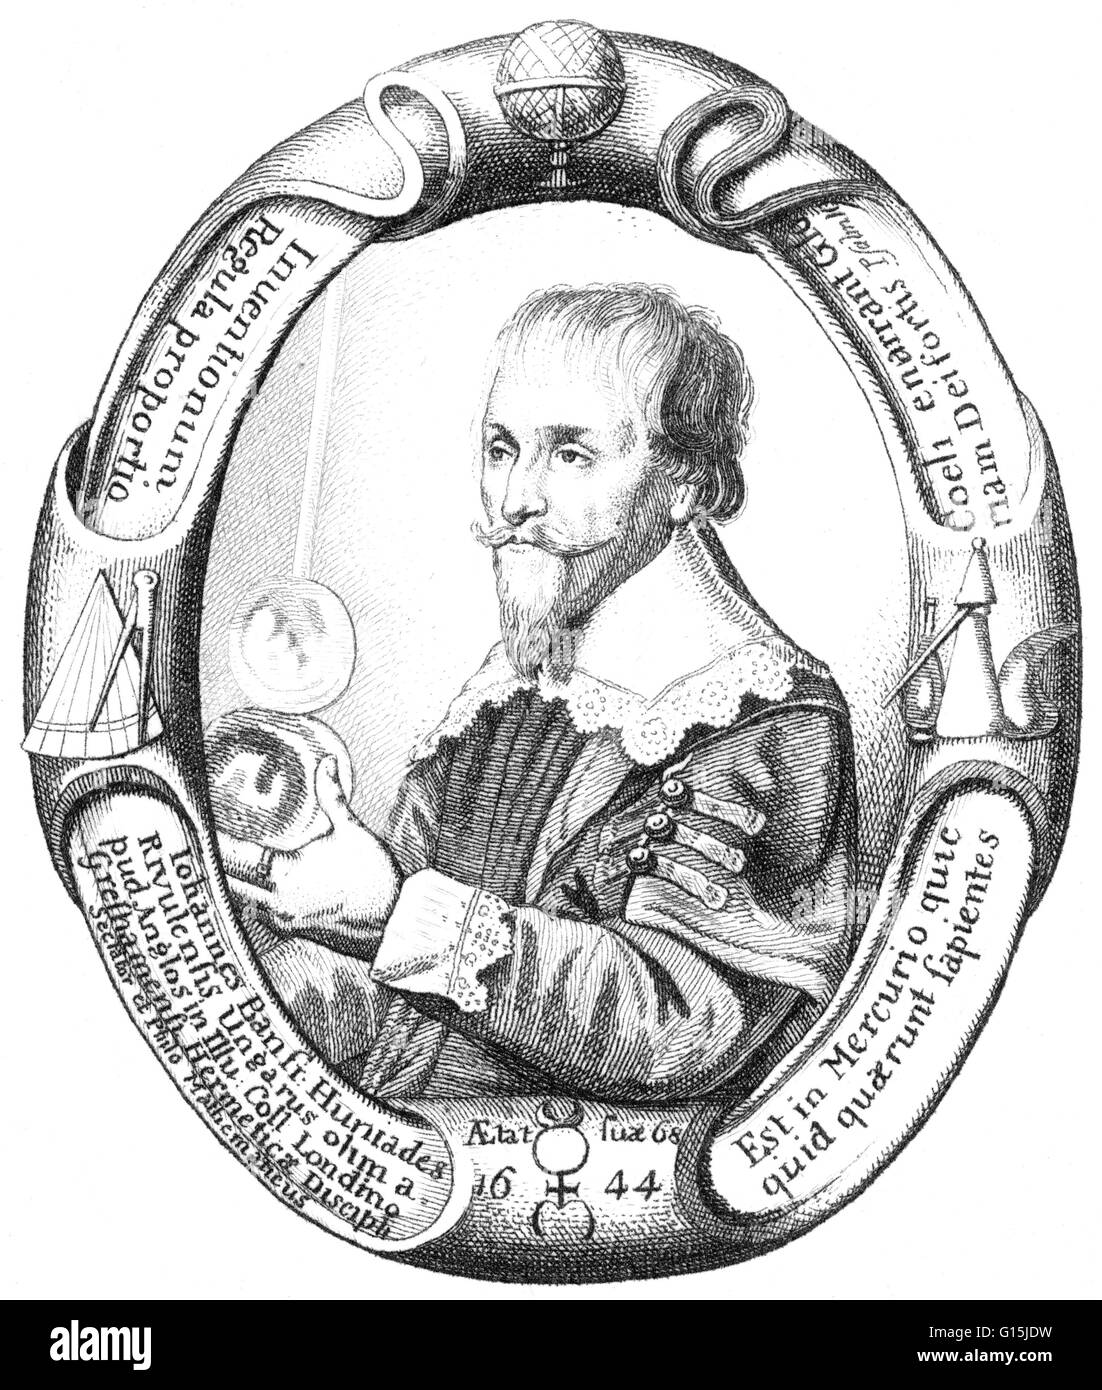 Johannes Huniades (1576-1646) was a Hungarian goldsmith and alchemist, resident in England from 1608. He worked for Arthur Dee (English physician and alchemist) and Theodore de Mayerne.(Swiss physician who advanced the theories of Paracelsus). Stock Photo